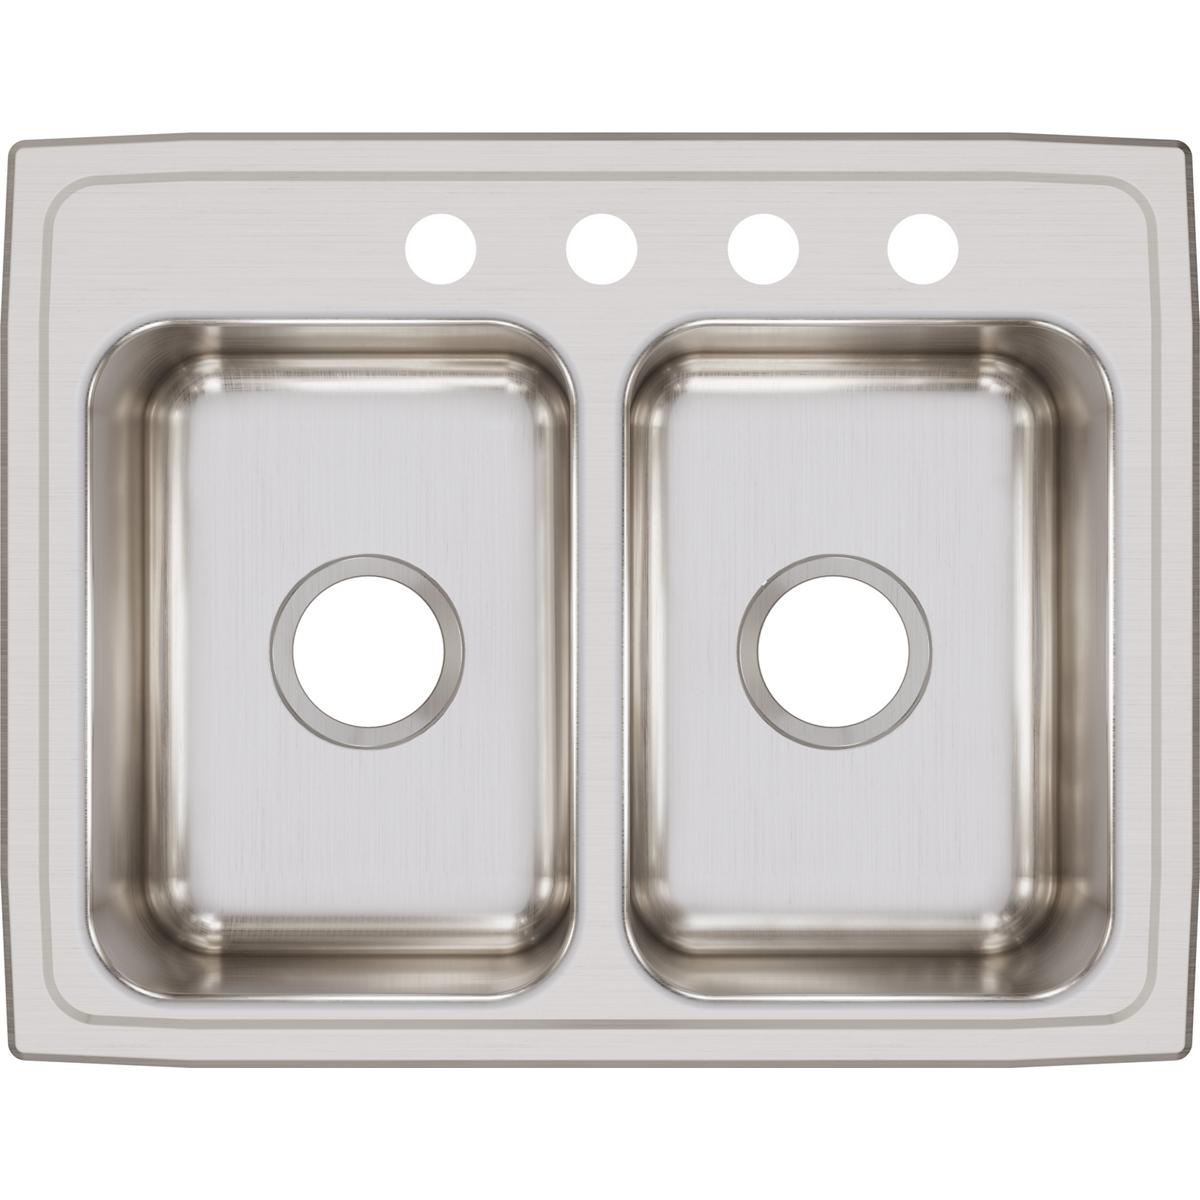 Elkay Lustertone Classic 25" x 19-1/2" x 7-5/8" Equal Double Bowl Stainless Steel Drop-in Sink